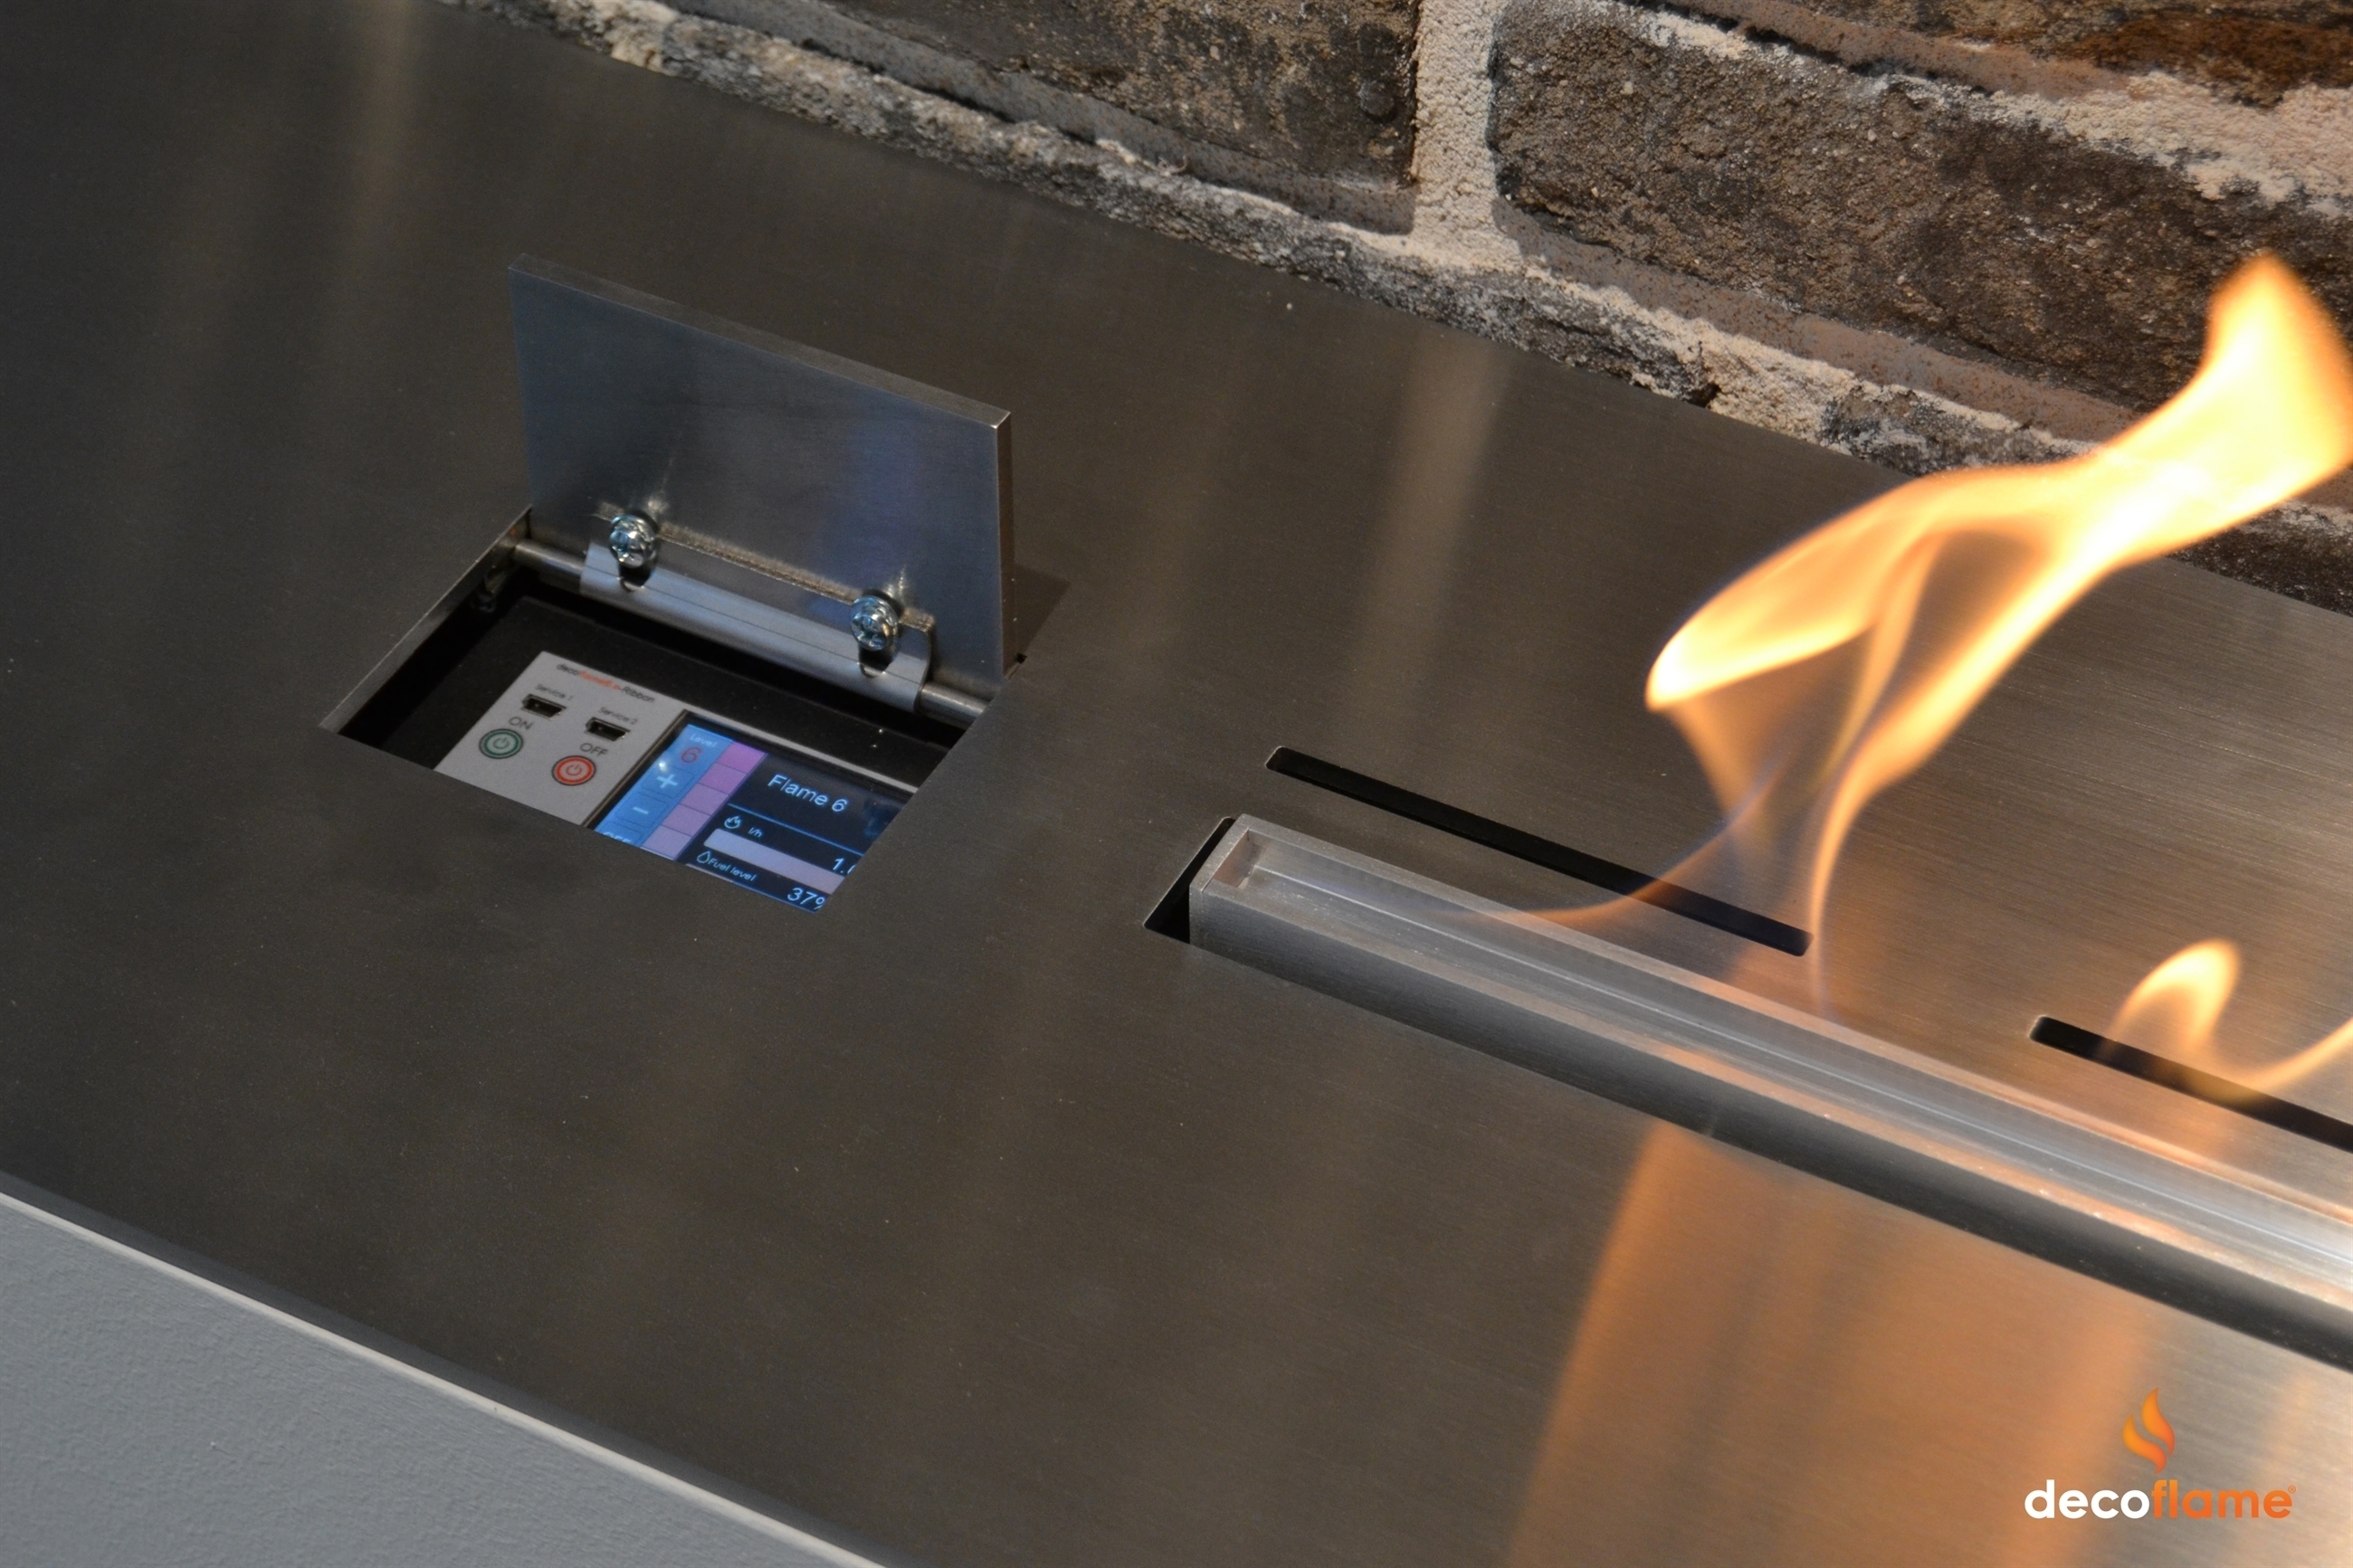 New touch display automatic bioethanol fireplace